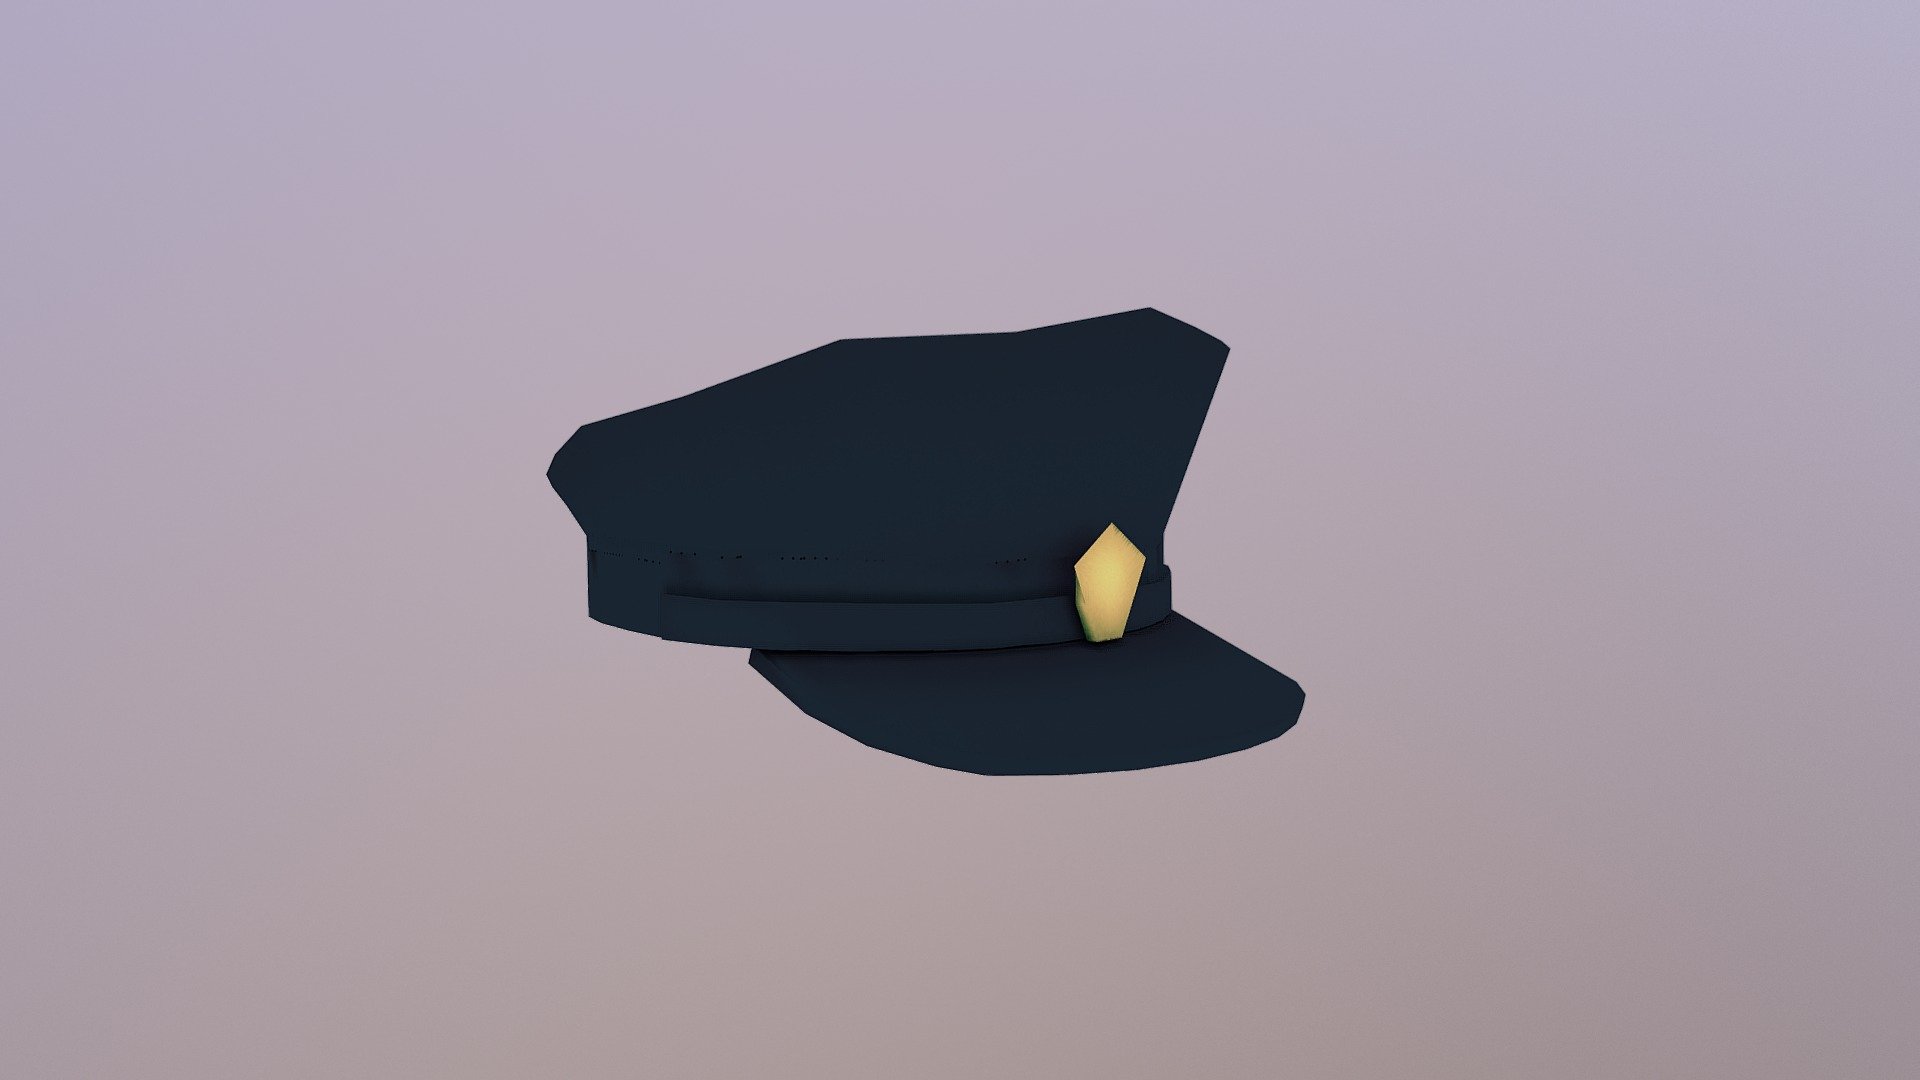 Low poly police hat asset for a mobile game. One of my first models on Blender! - Cop Hat Asset - 3D model by janetveeart 3d model